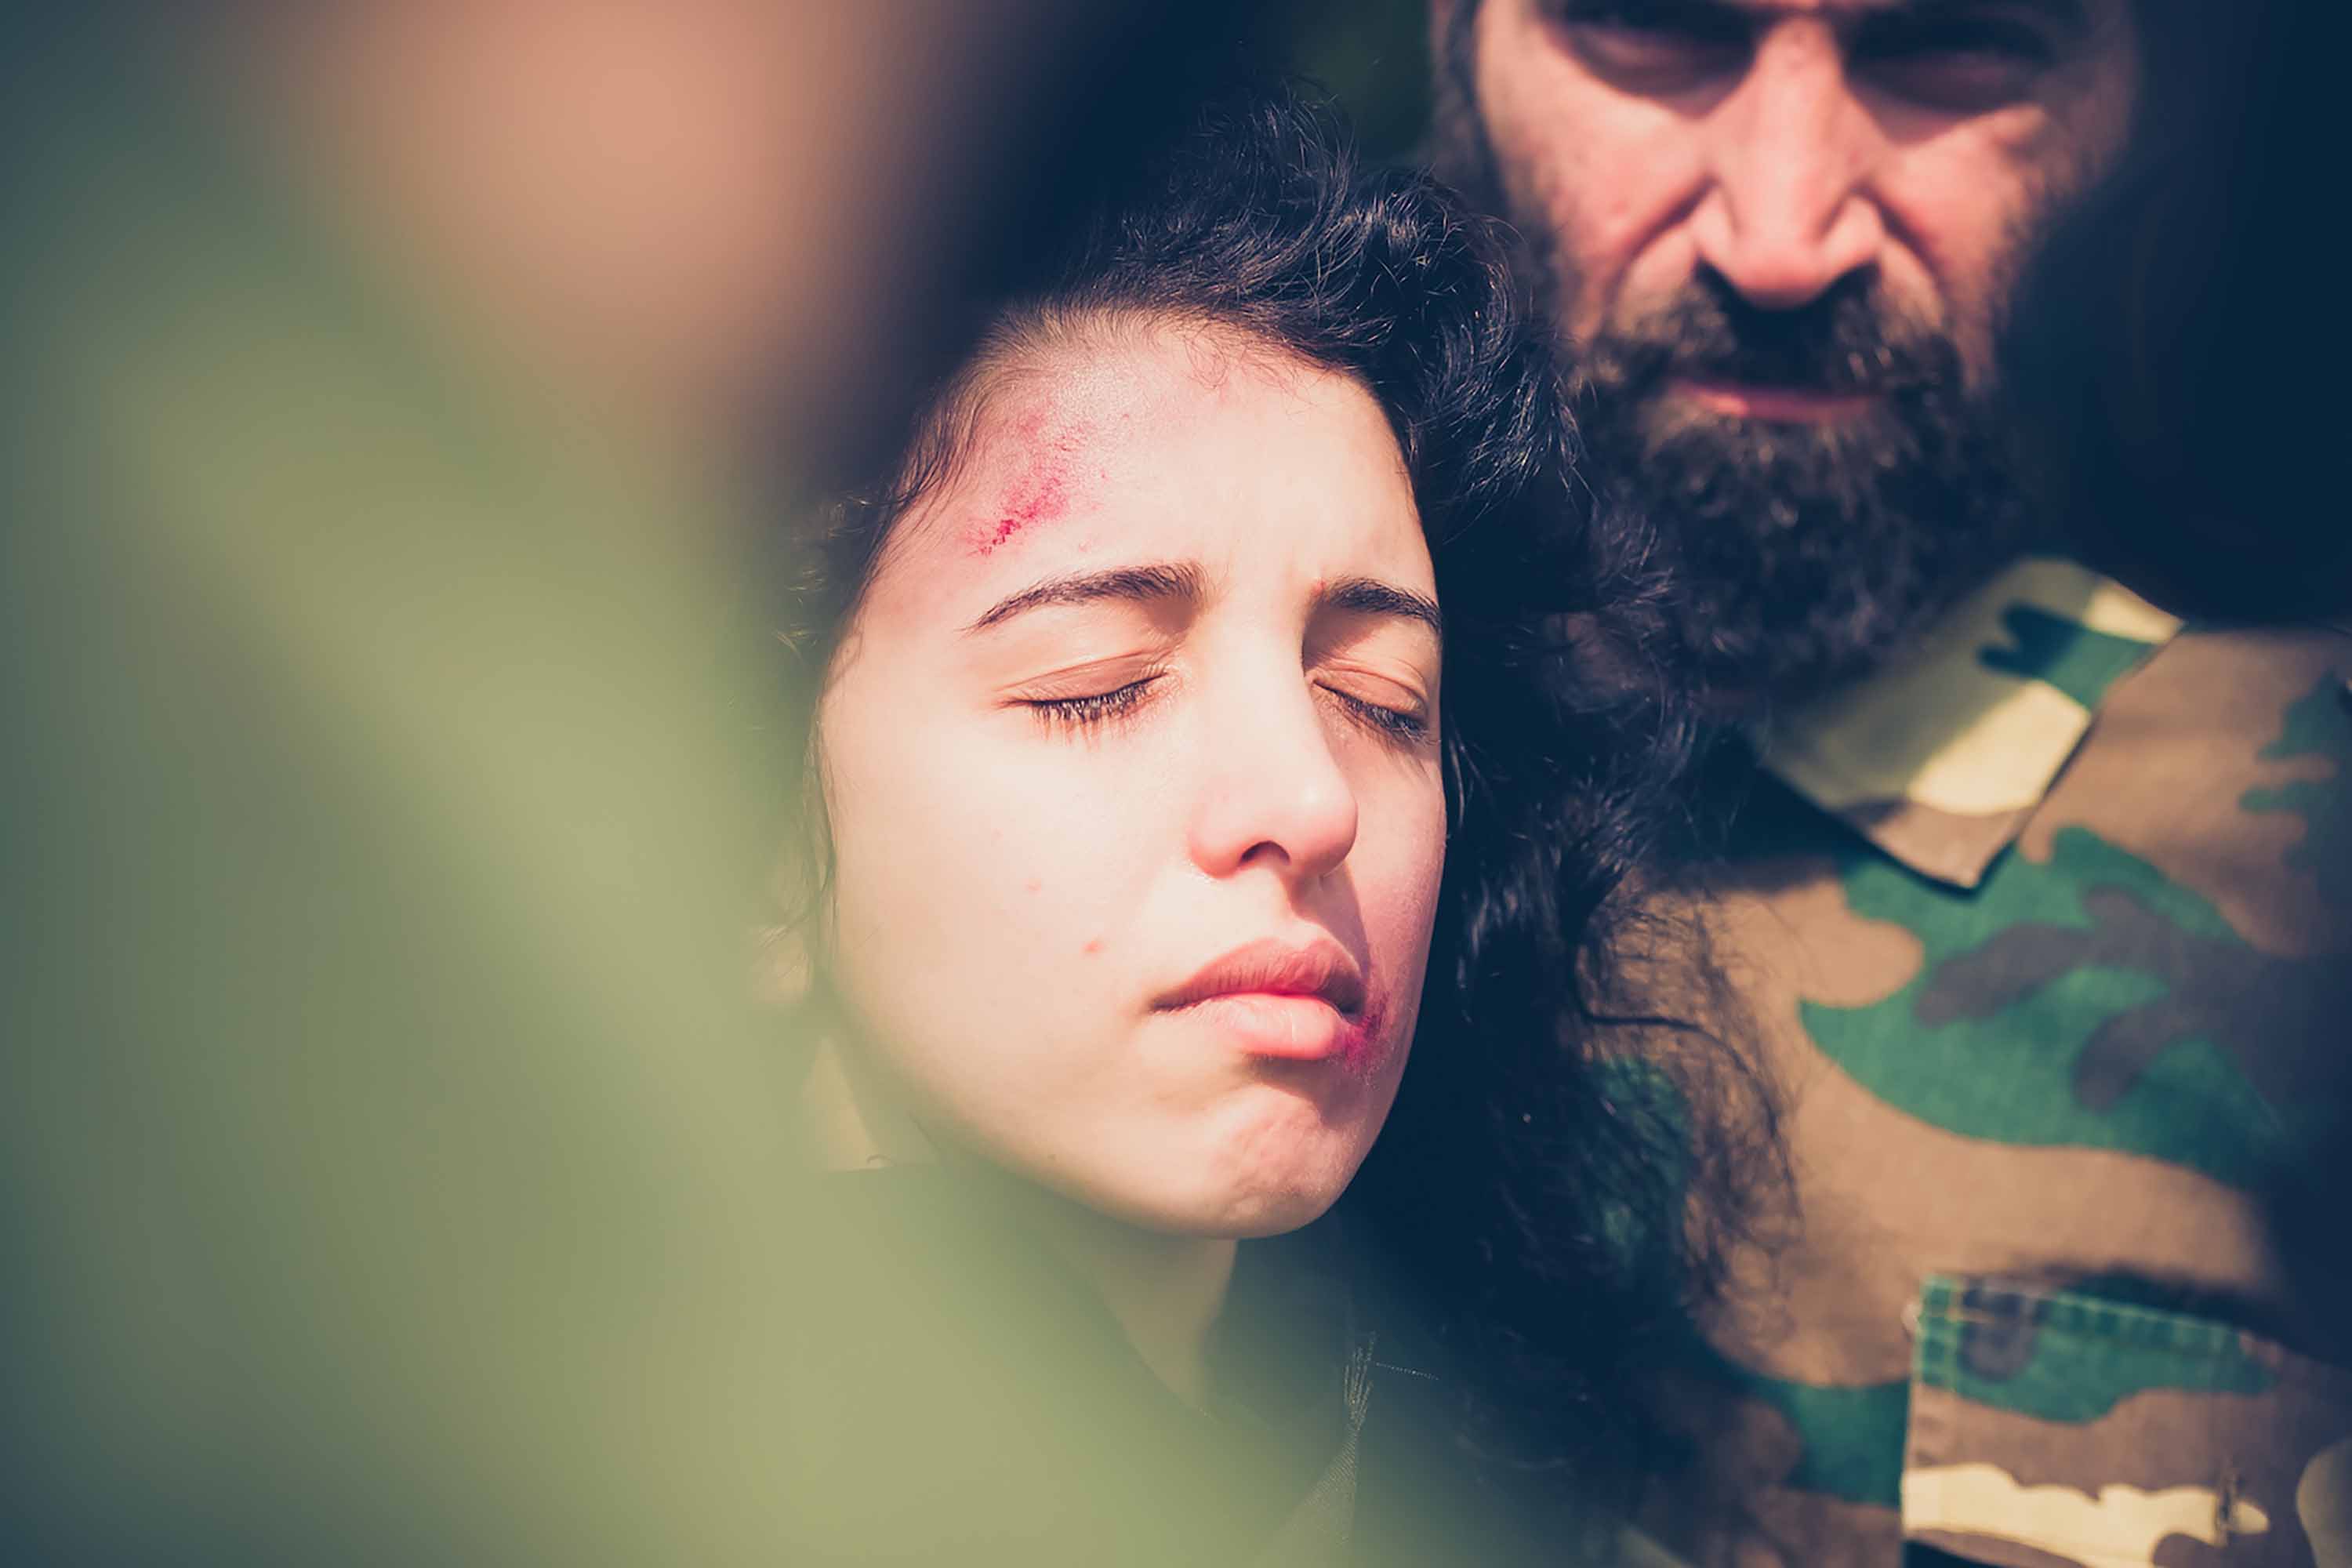 Khawla Ibraheem and a male actor standing with their heads together. She has her eyes closed and a visible bruise on her forehead, he has a thick beard and is wearing army fatigues.